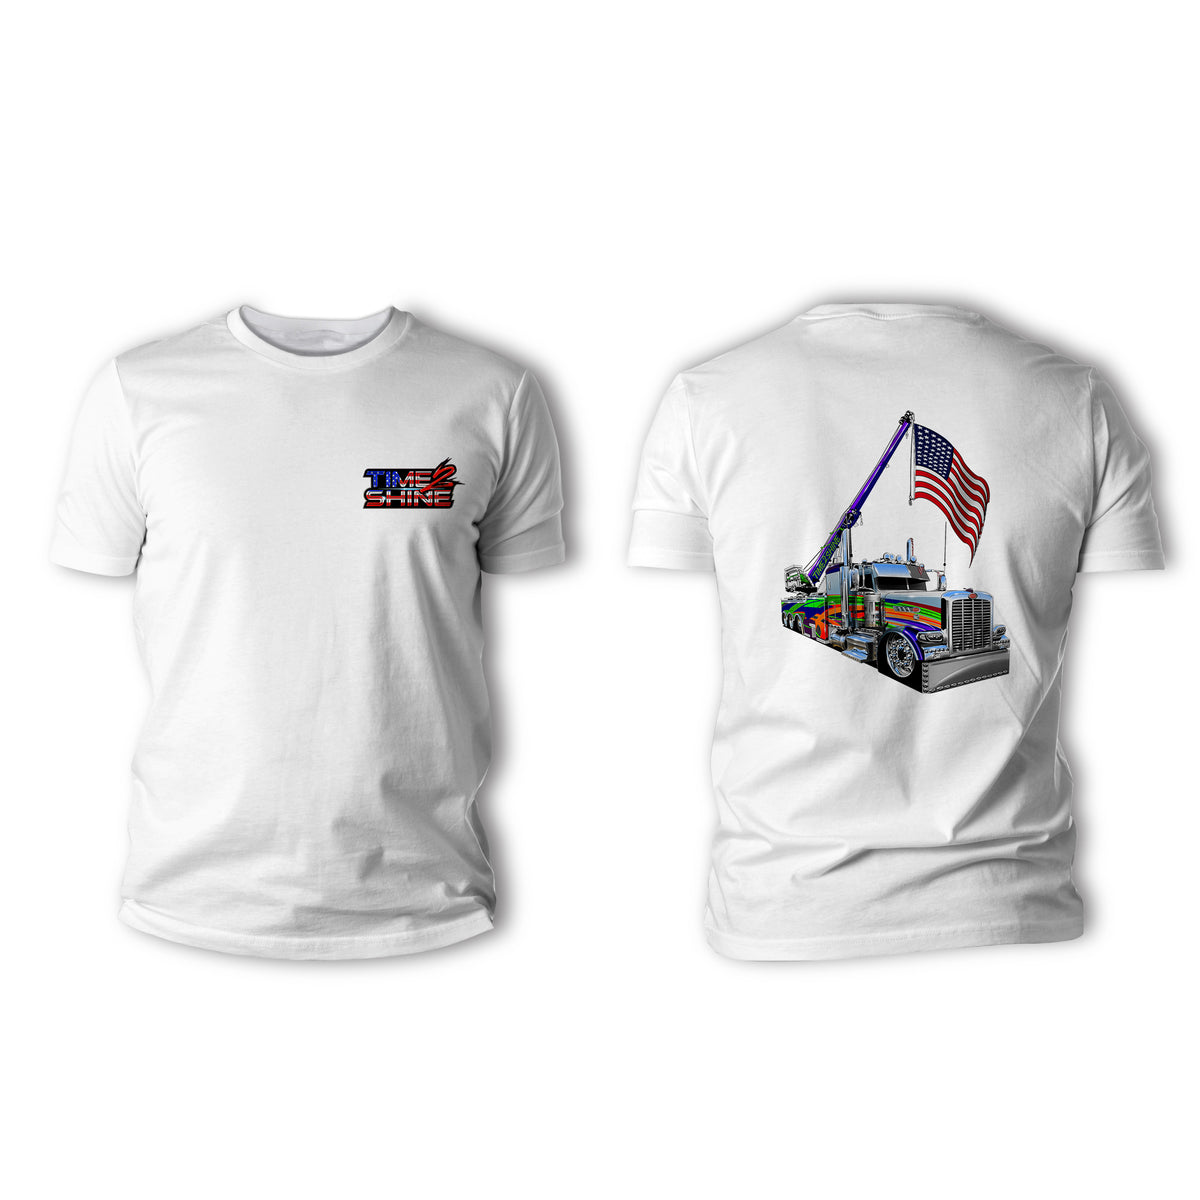 Towing the Line Shirts and Hoodies